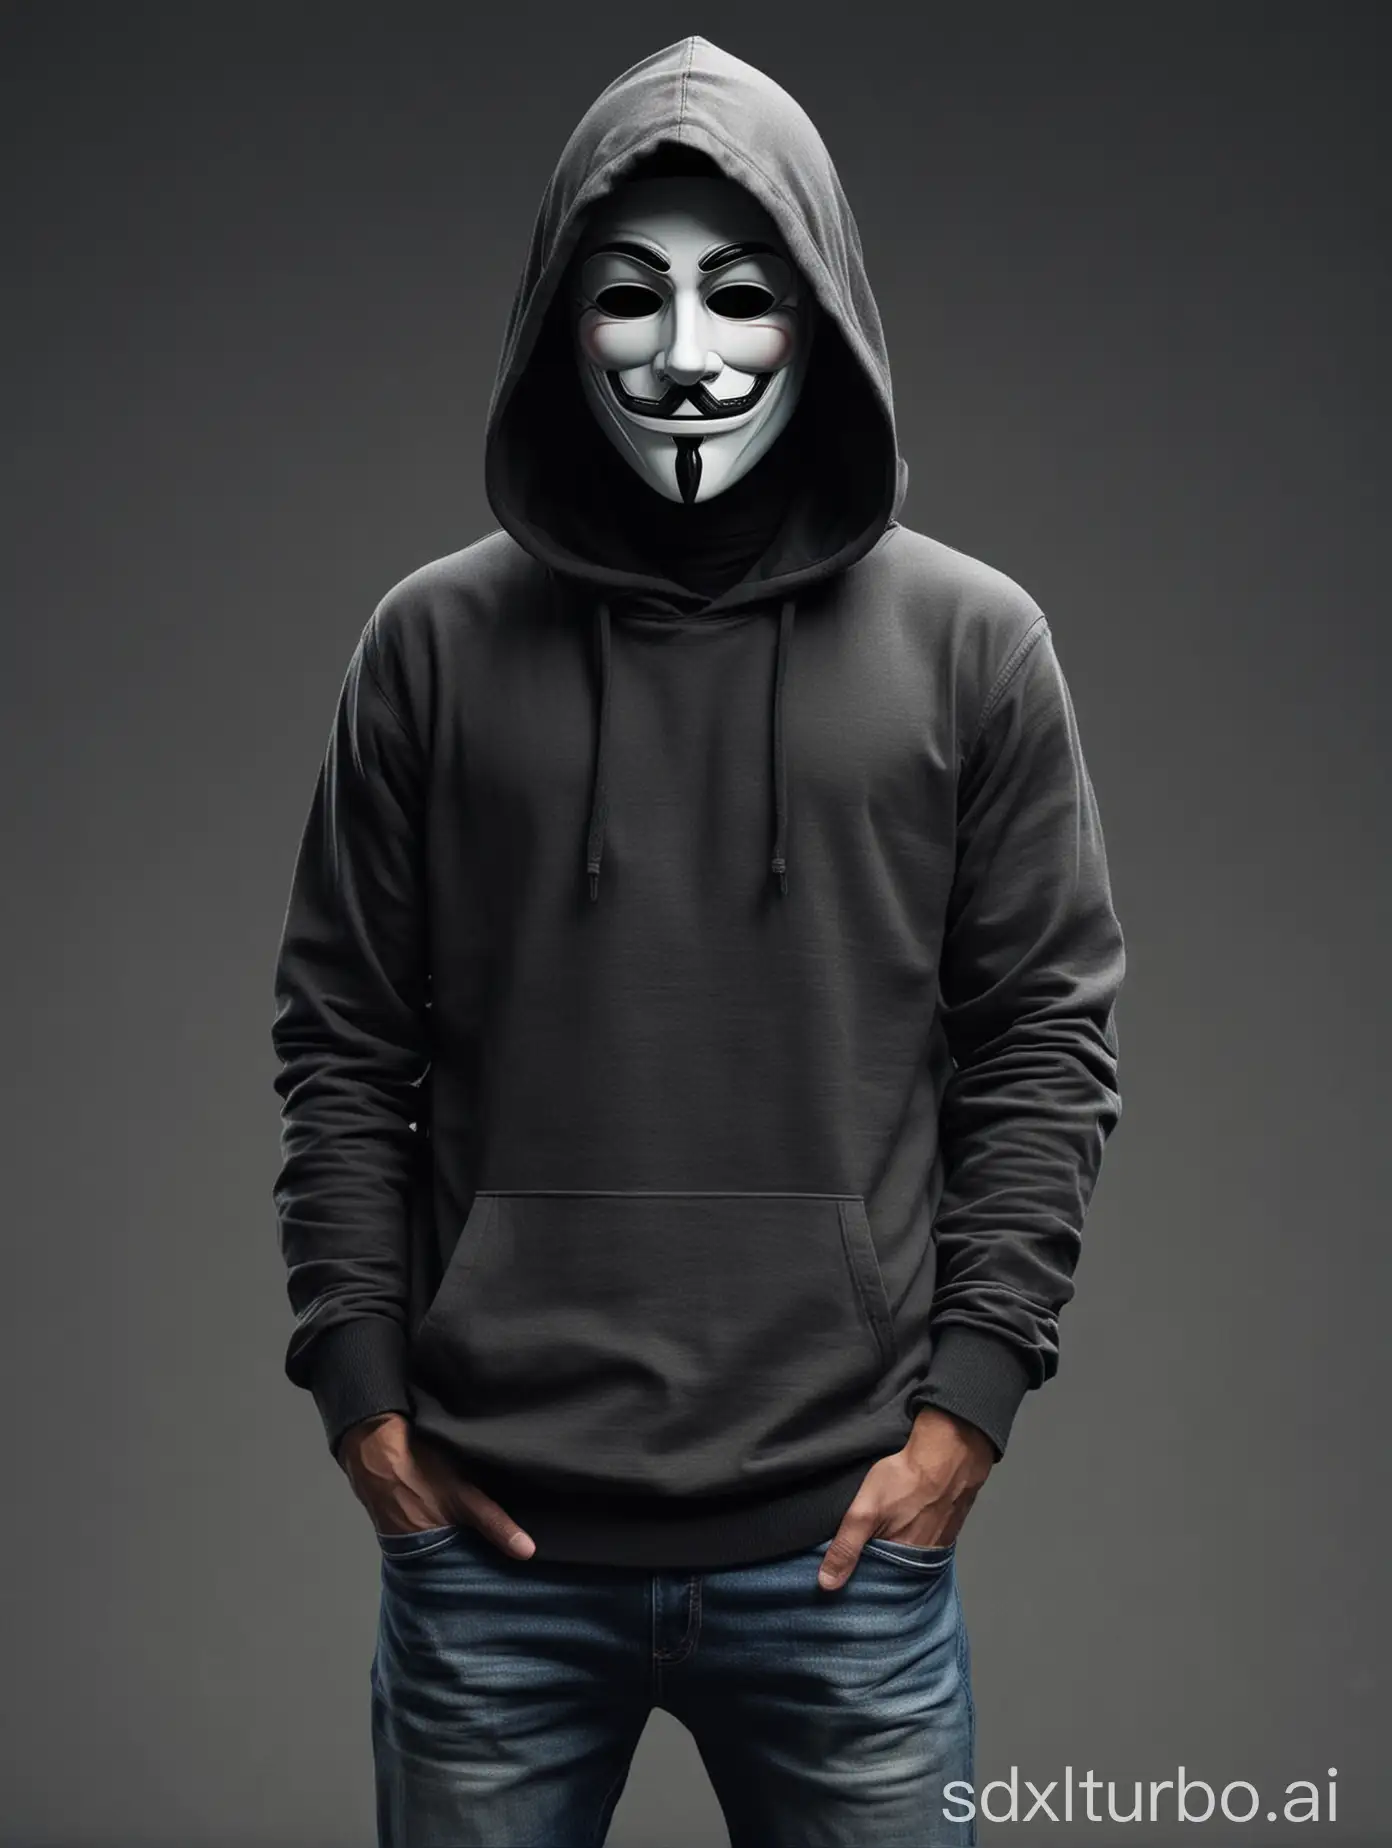 Anonymous-Computer-Specialist-in-Dark-Clothing-with-Hood-and-Sweater